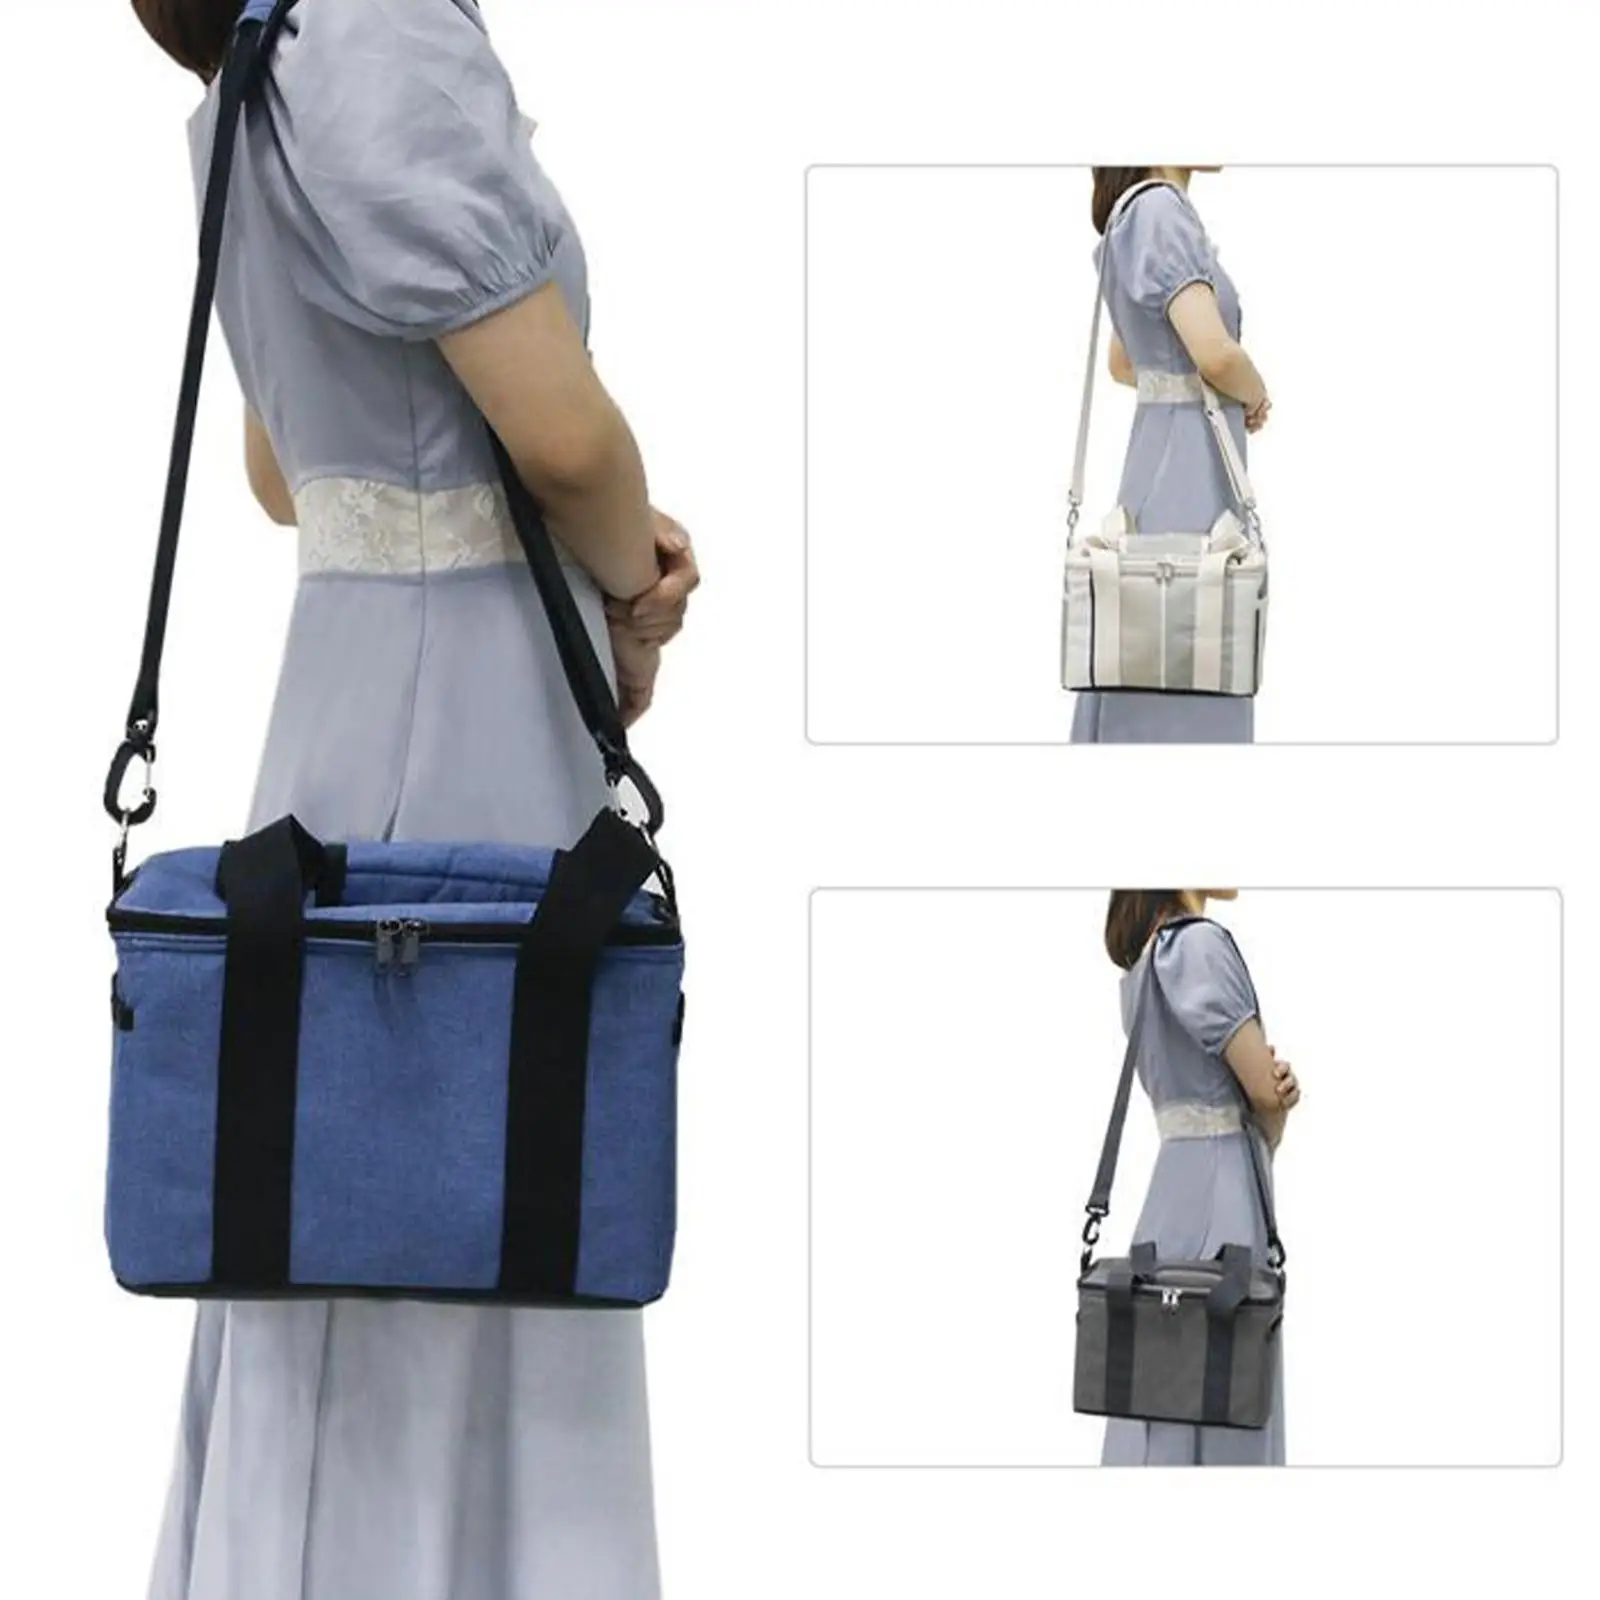 Waterproof Large Capacity Insulation Food Cooler Bag Thermal Lunch Box Carrier Storage Handbag Travel BBQ Hand Bags